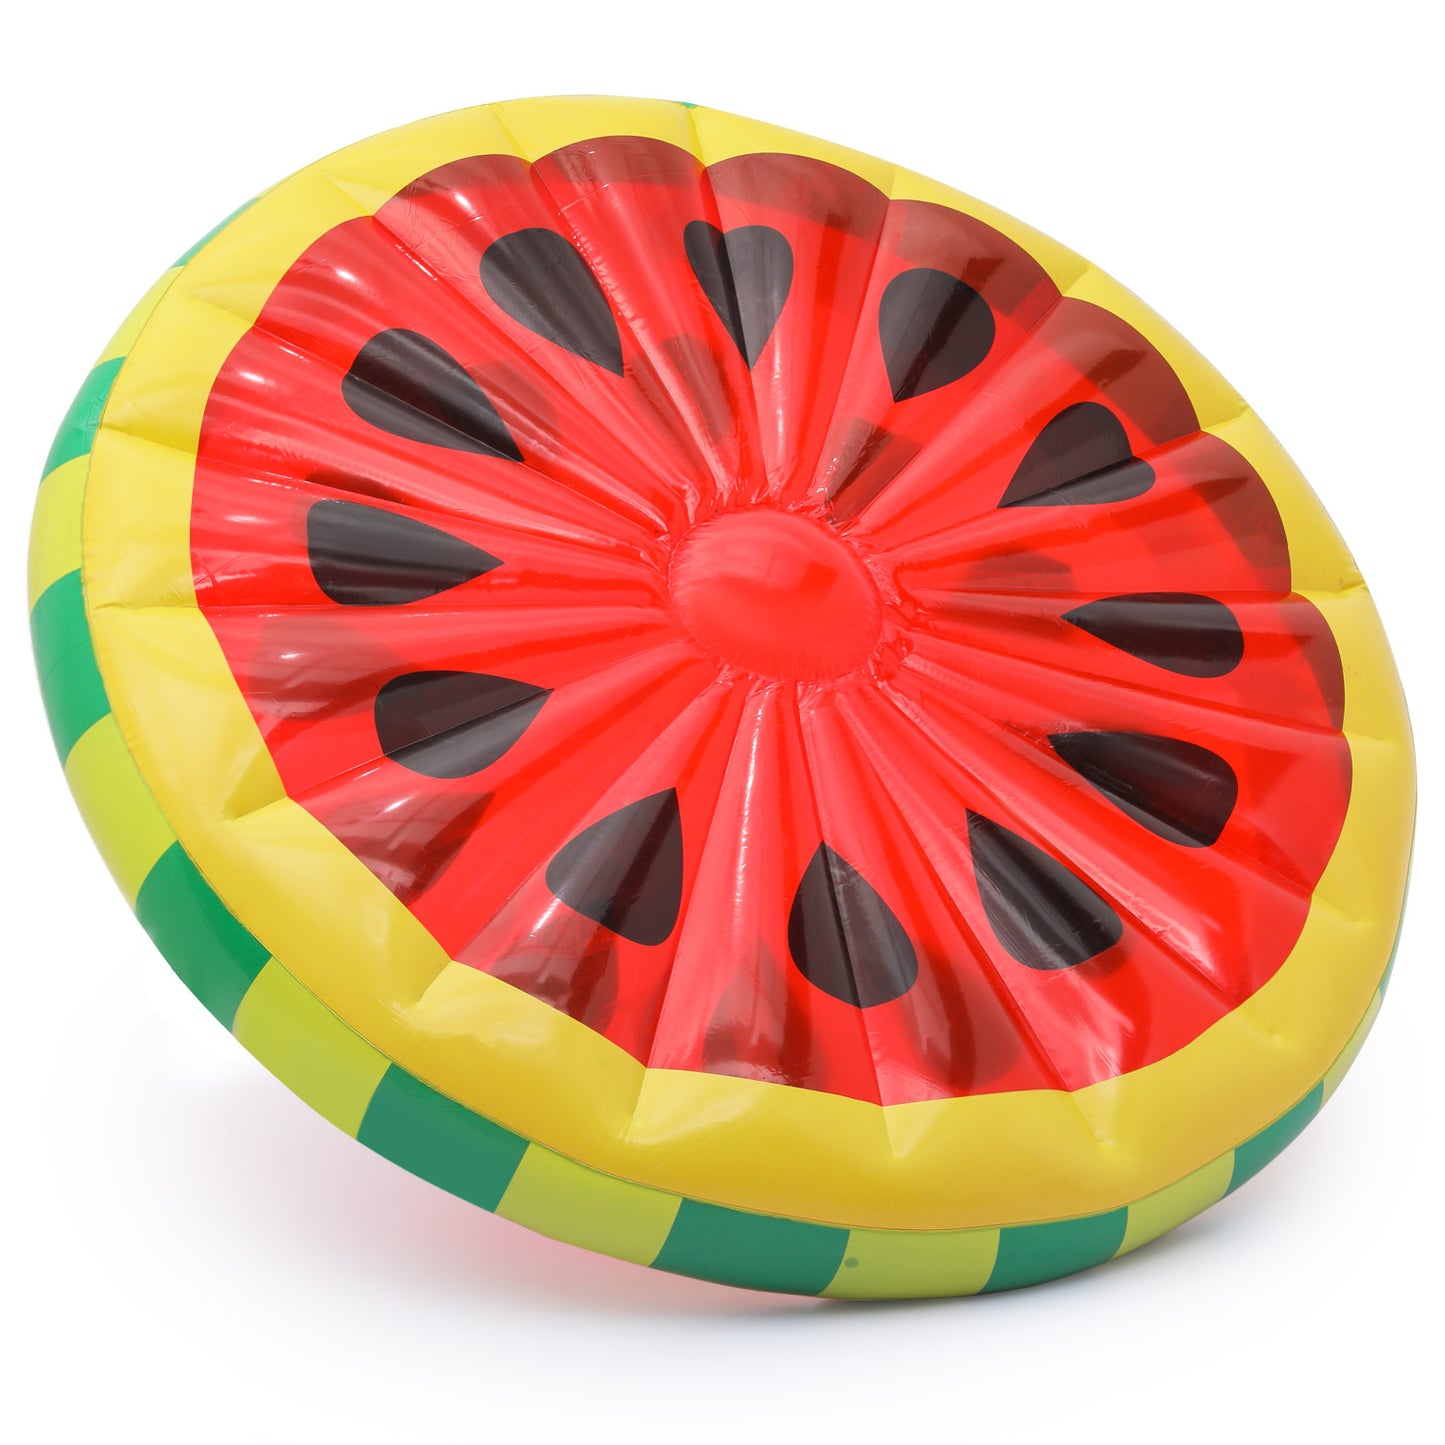 inflatable product-watermelon